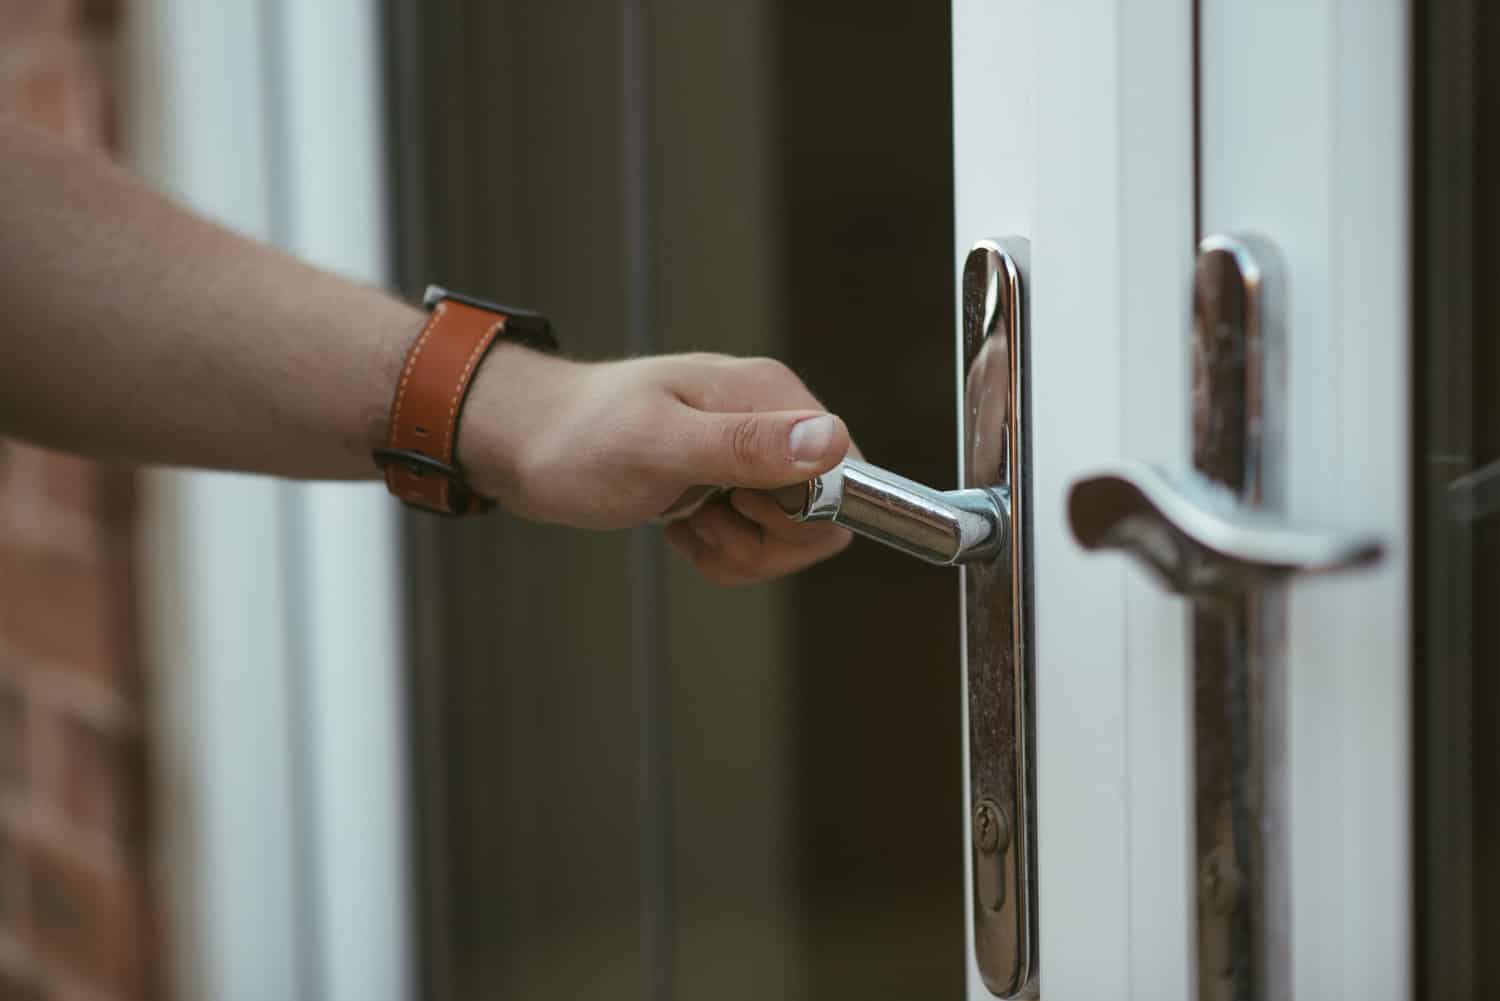 Thinking of replacing your exterior door locks? Here’s why you may want to consider exterior door replacement for better security. 